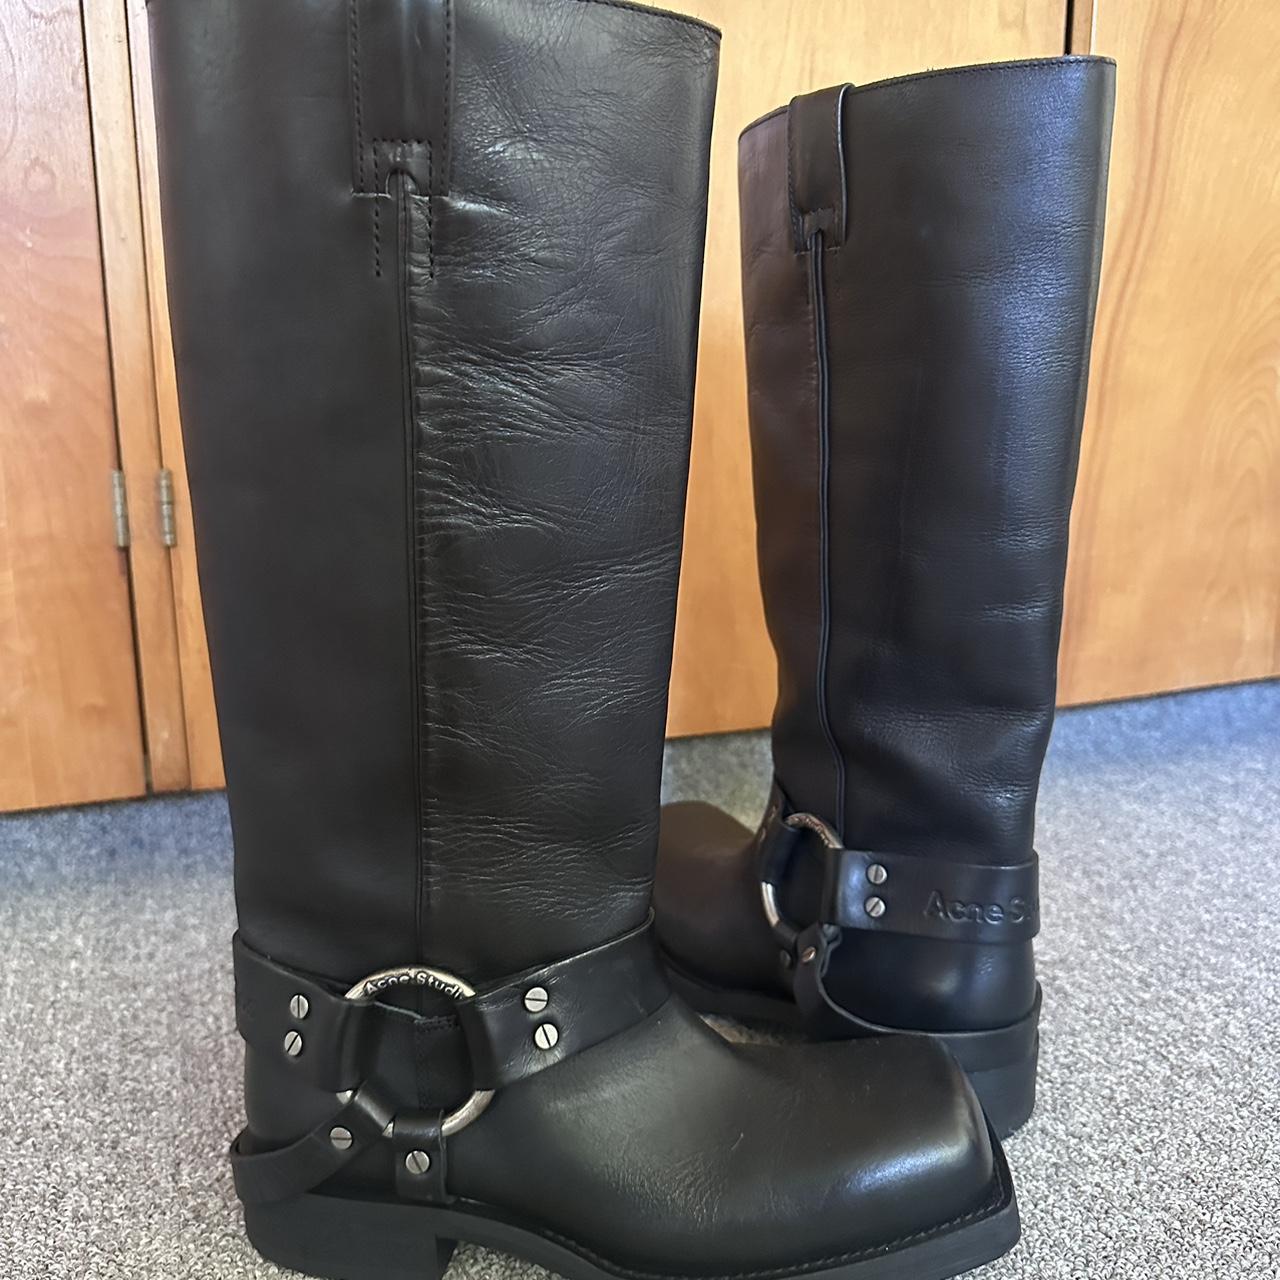 Acne studios leather buckle boots size 38 US 8. From... - Depop